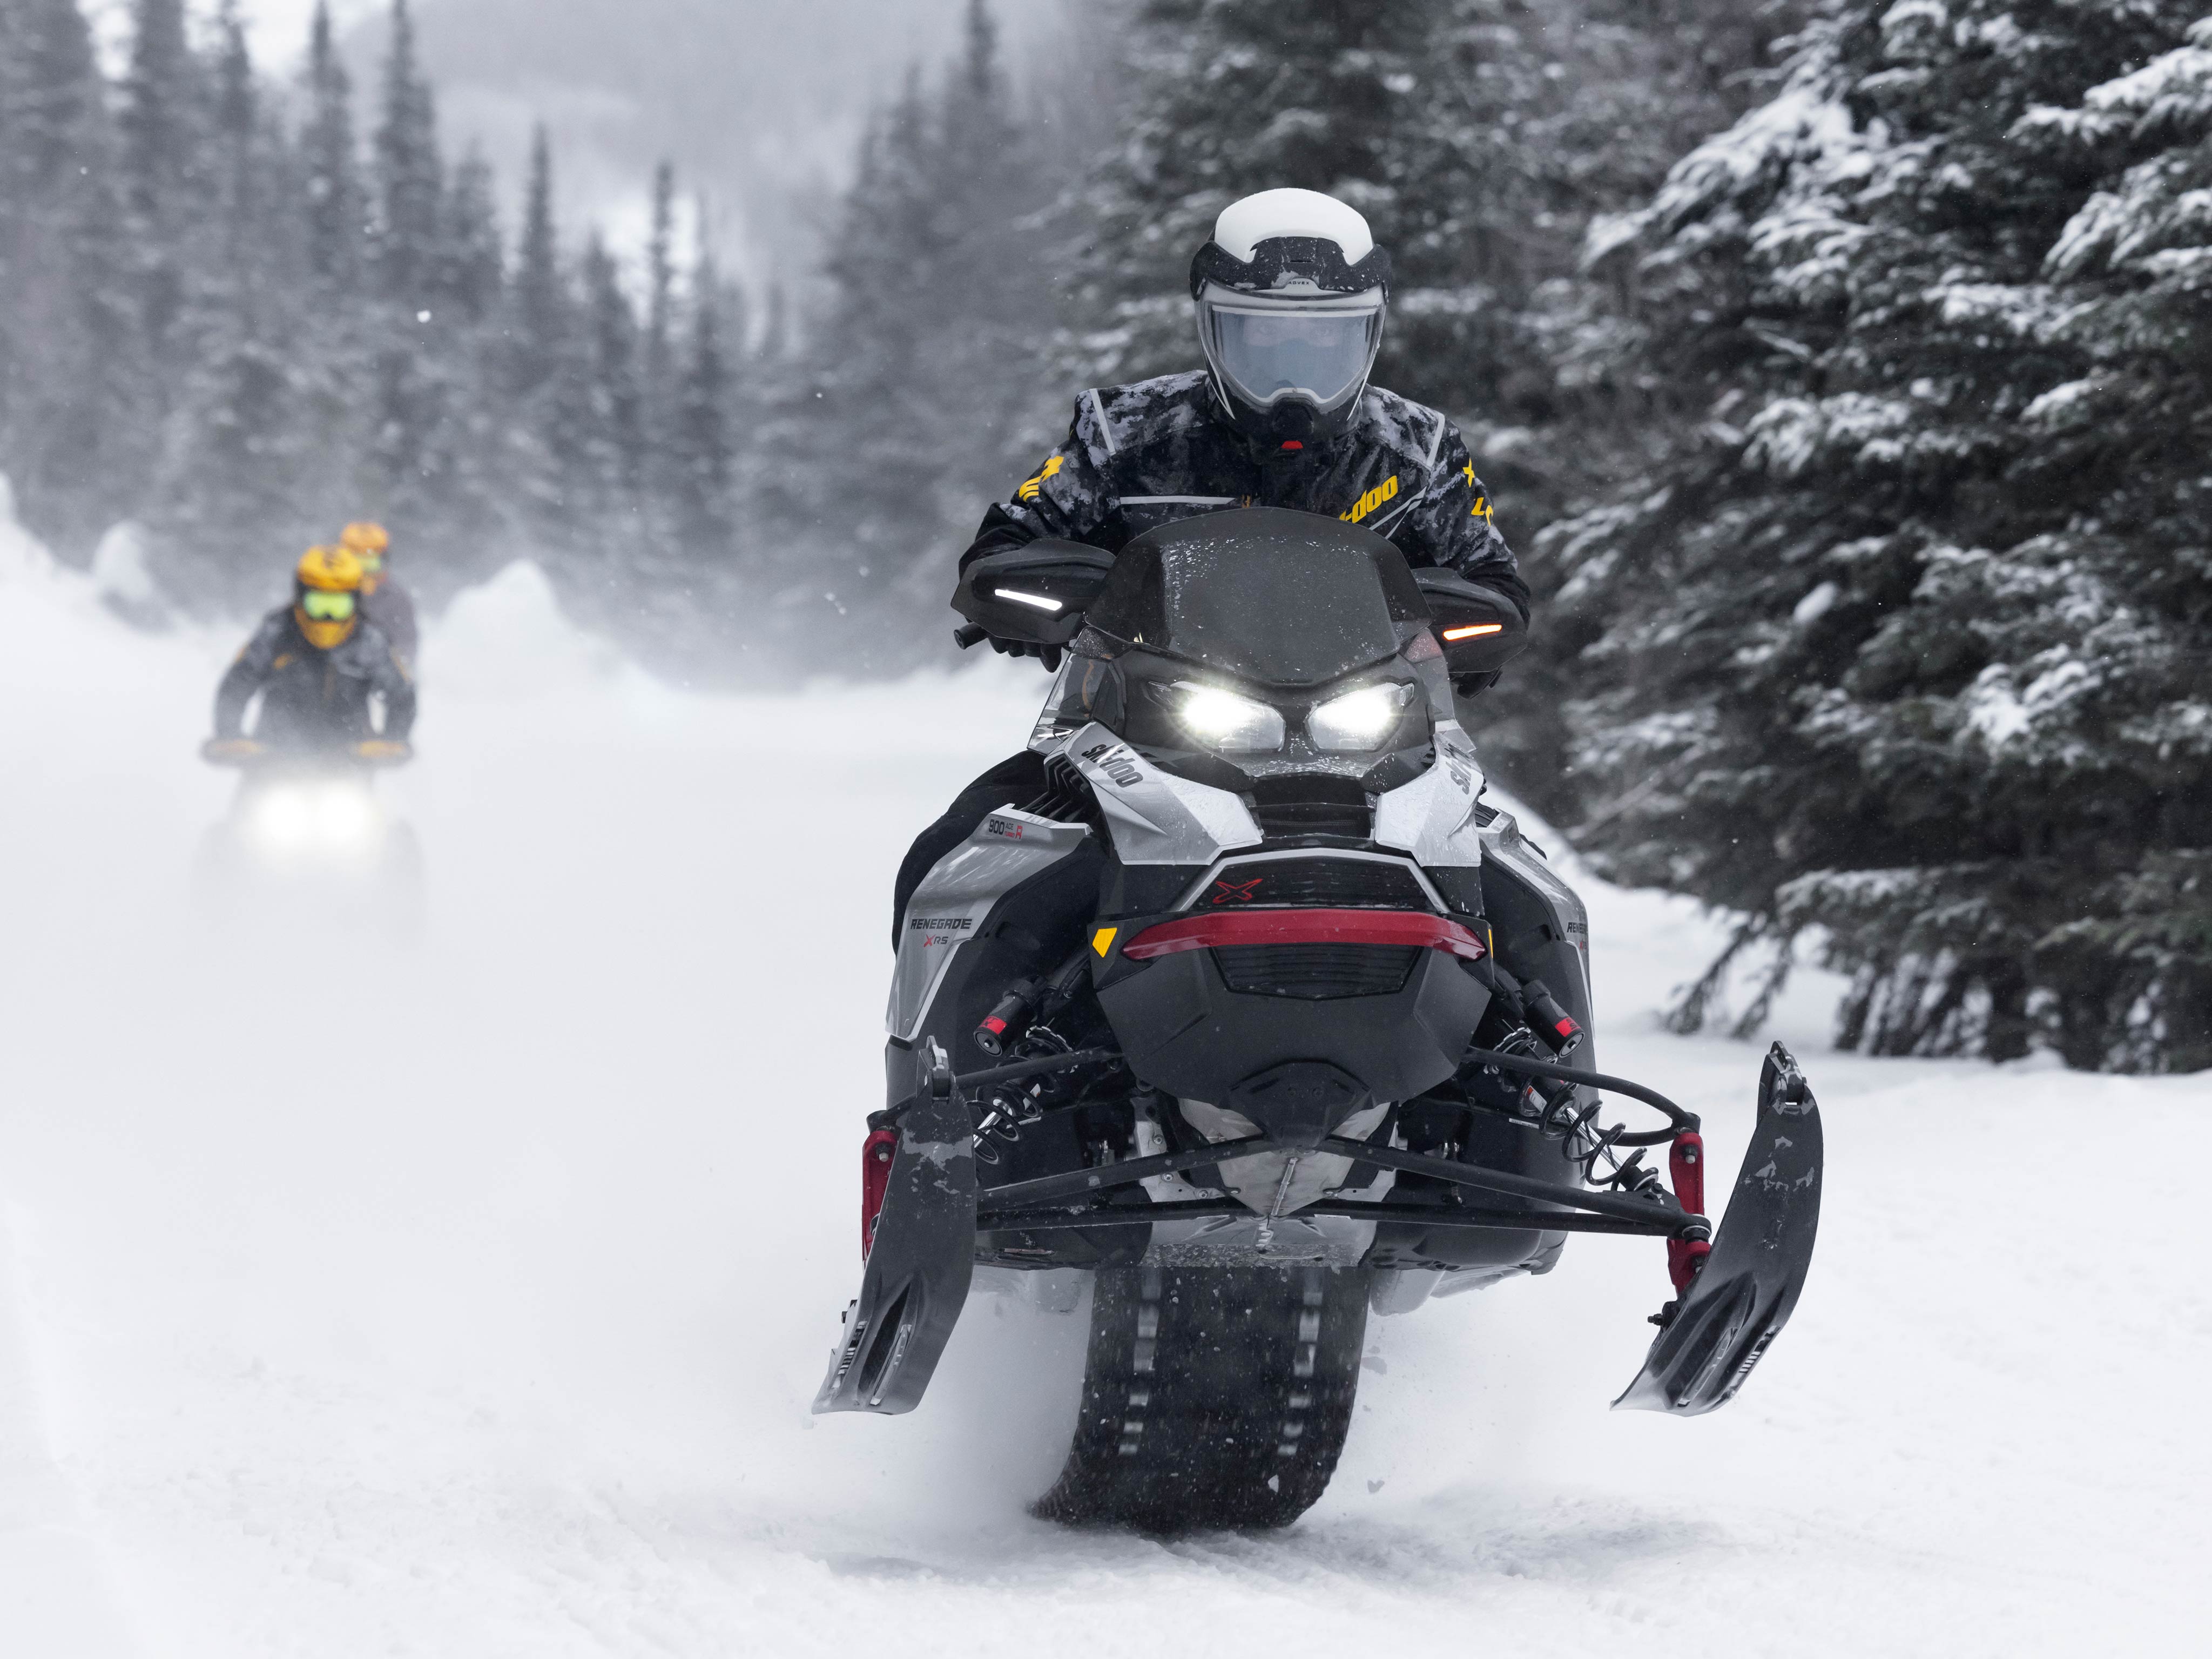 Man on Ski-Doo Renegade X-RS with other snowmobilers behind